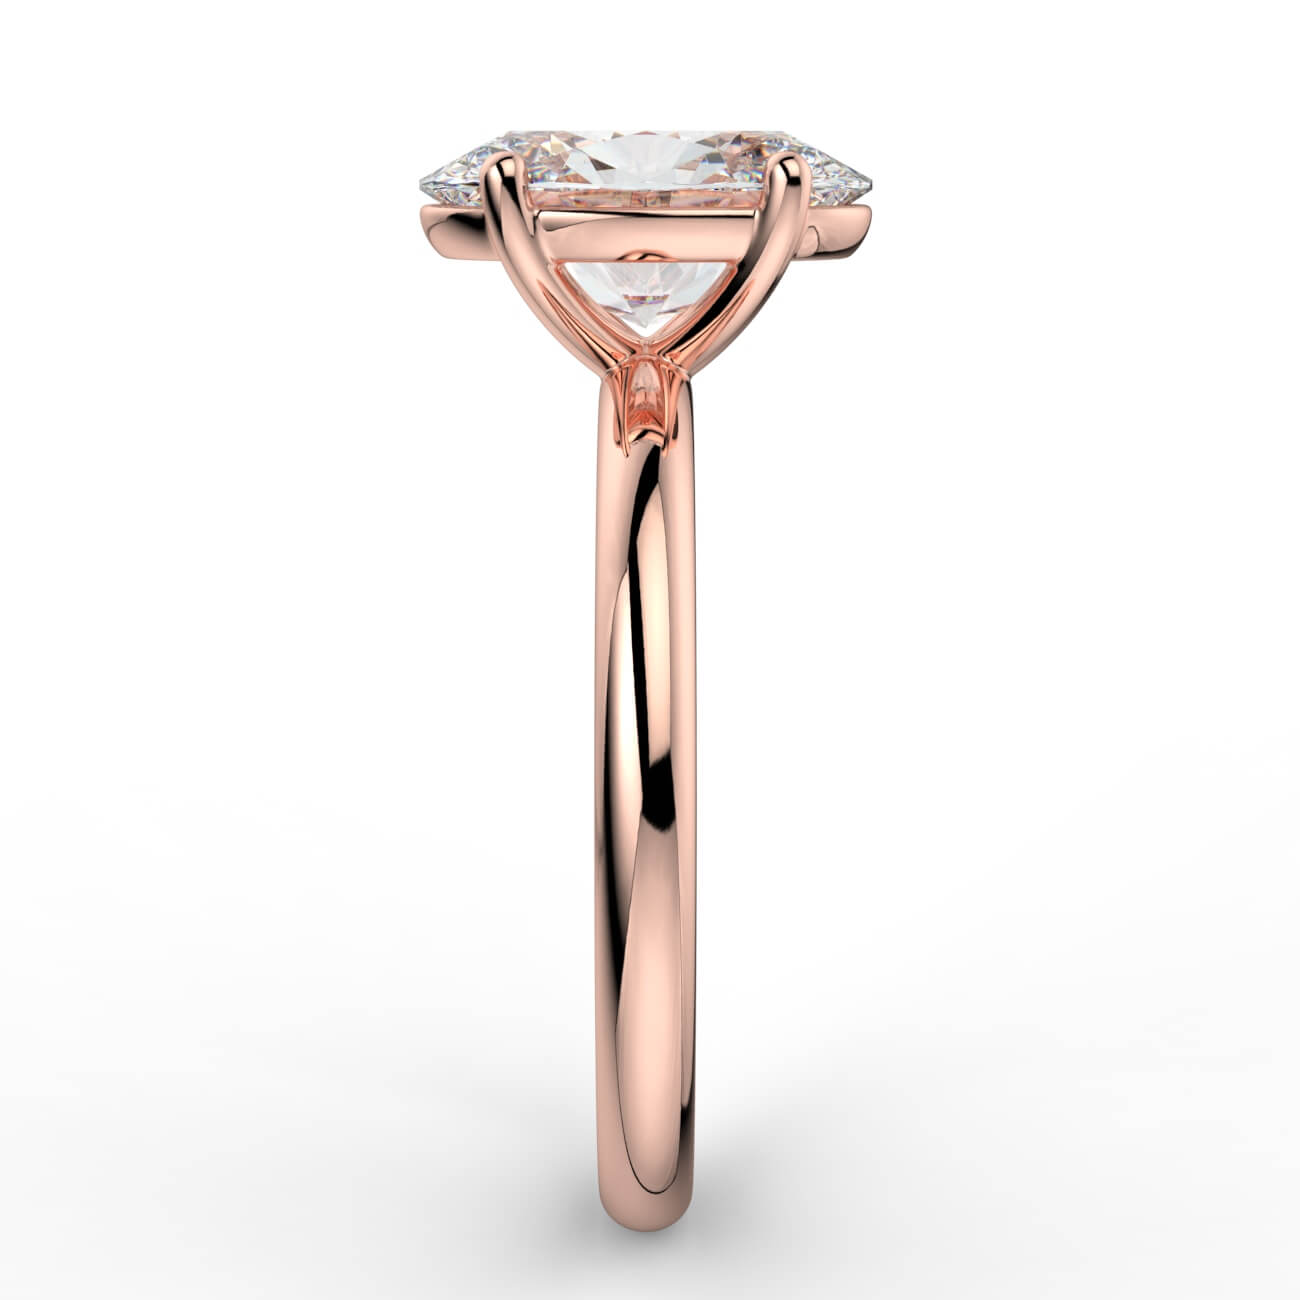 Solitaire oval diamond engagement ring in rose gold – Australian Diamond Network